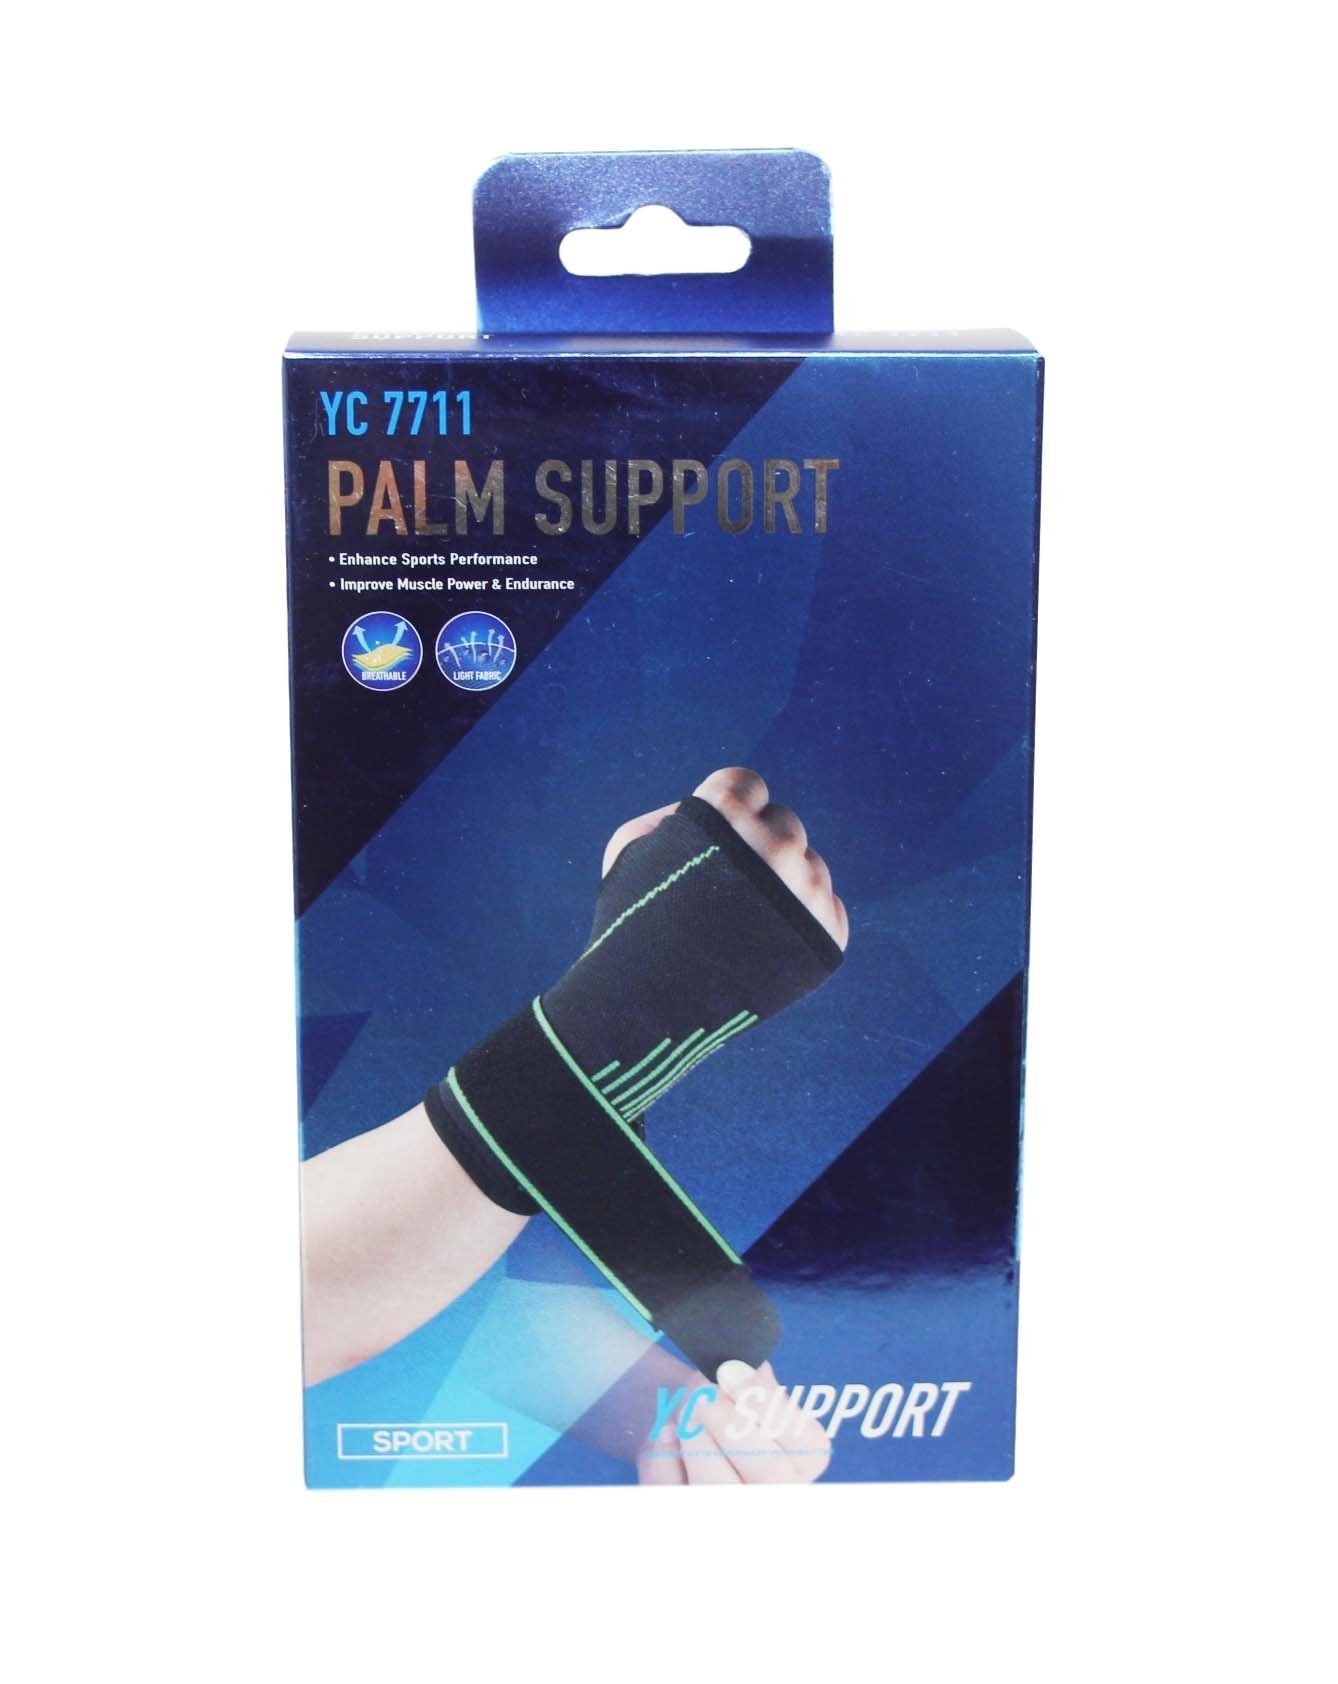 Palm Support Gym Fitness Light Fabric Compression Sport Palm Support 1 Pack 5997 (Parcel Rate)